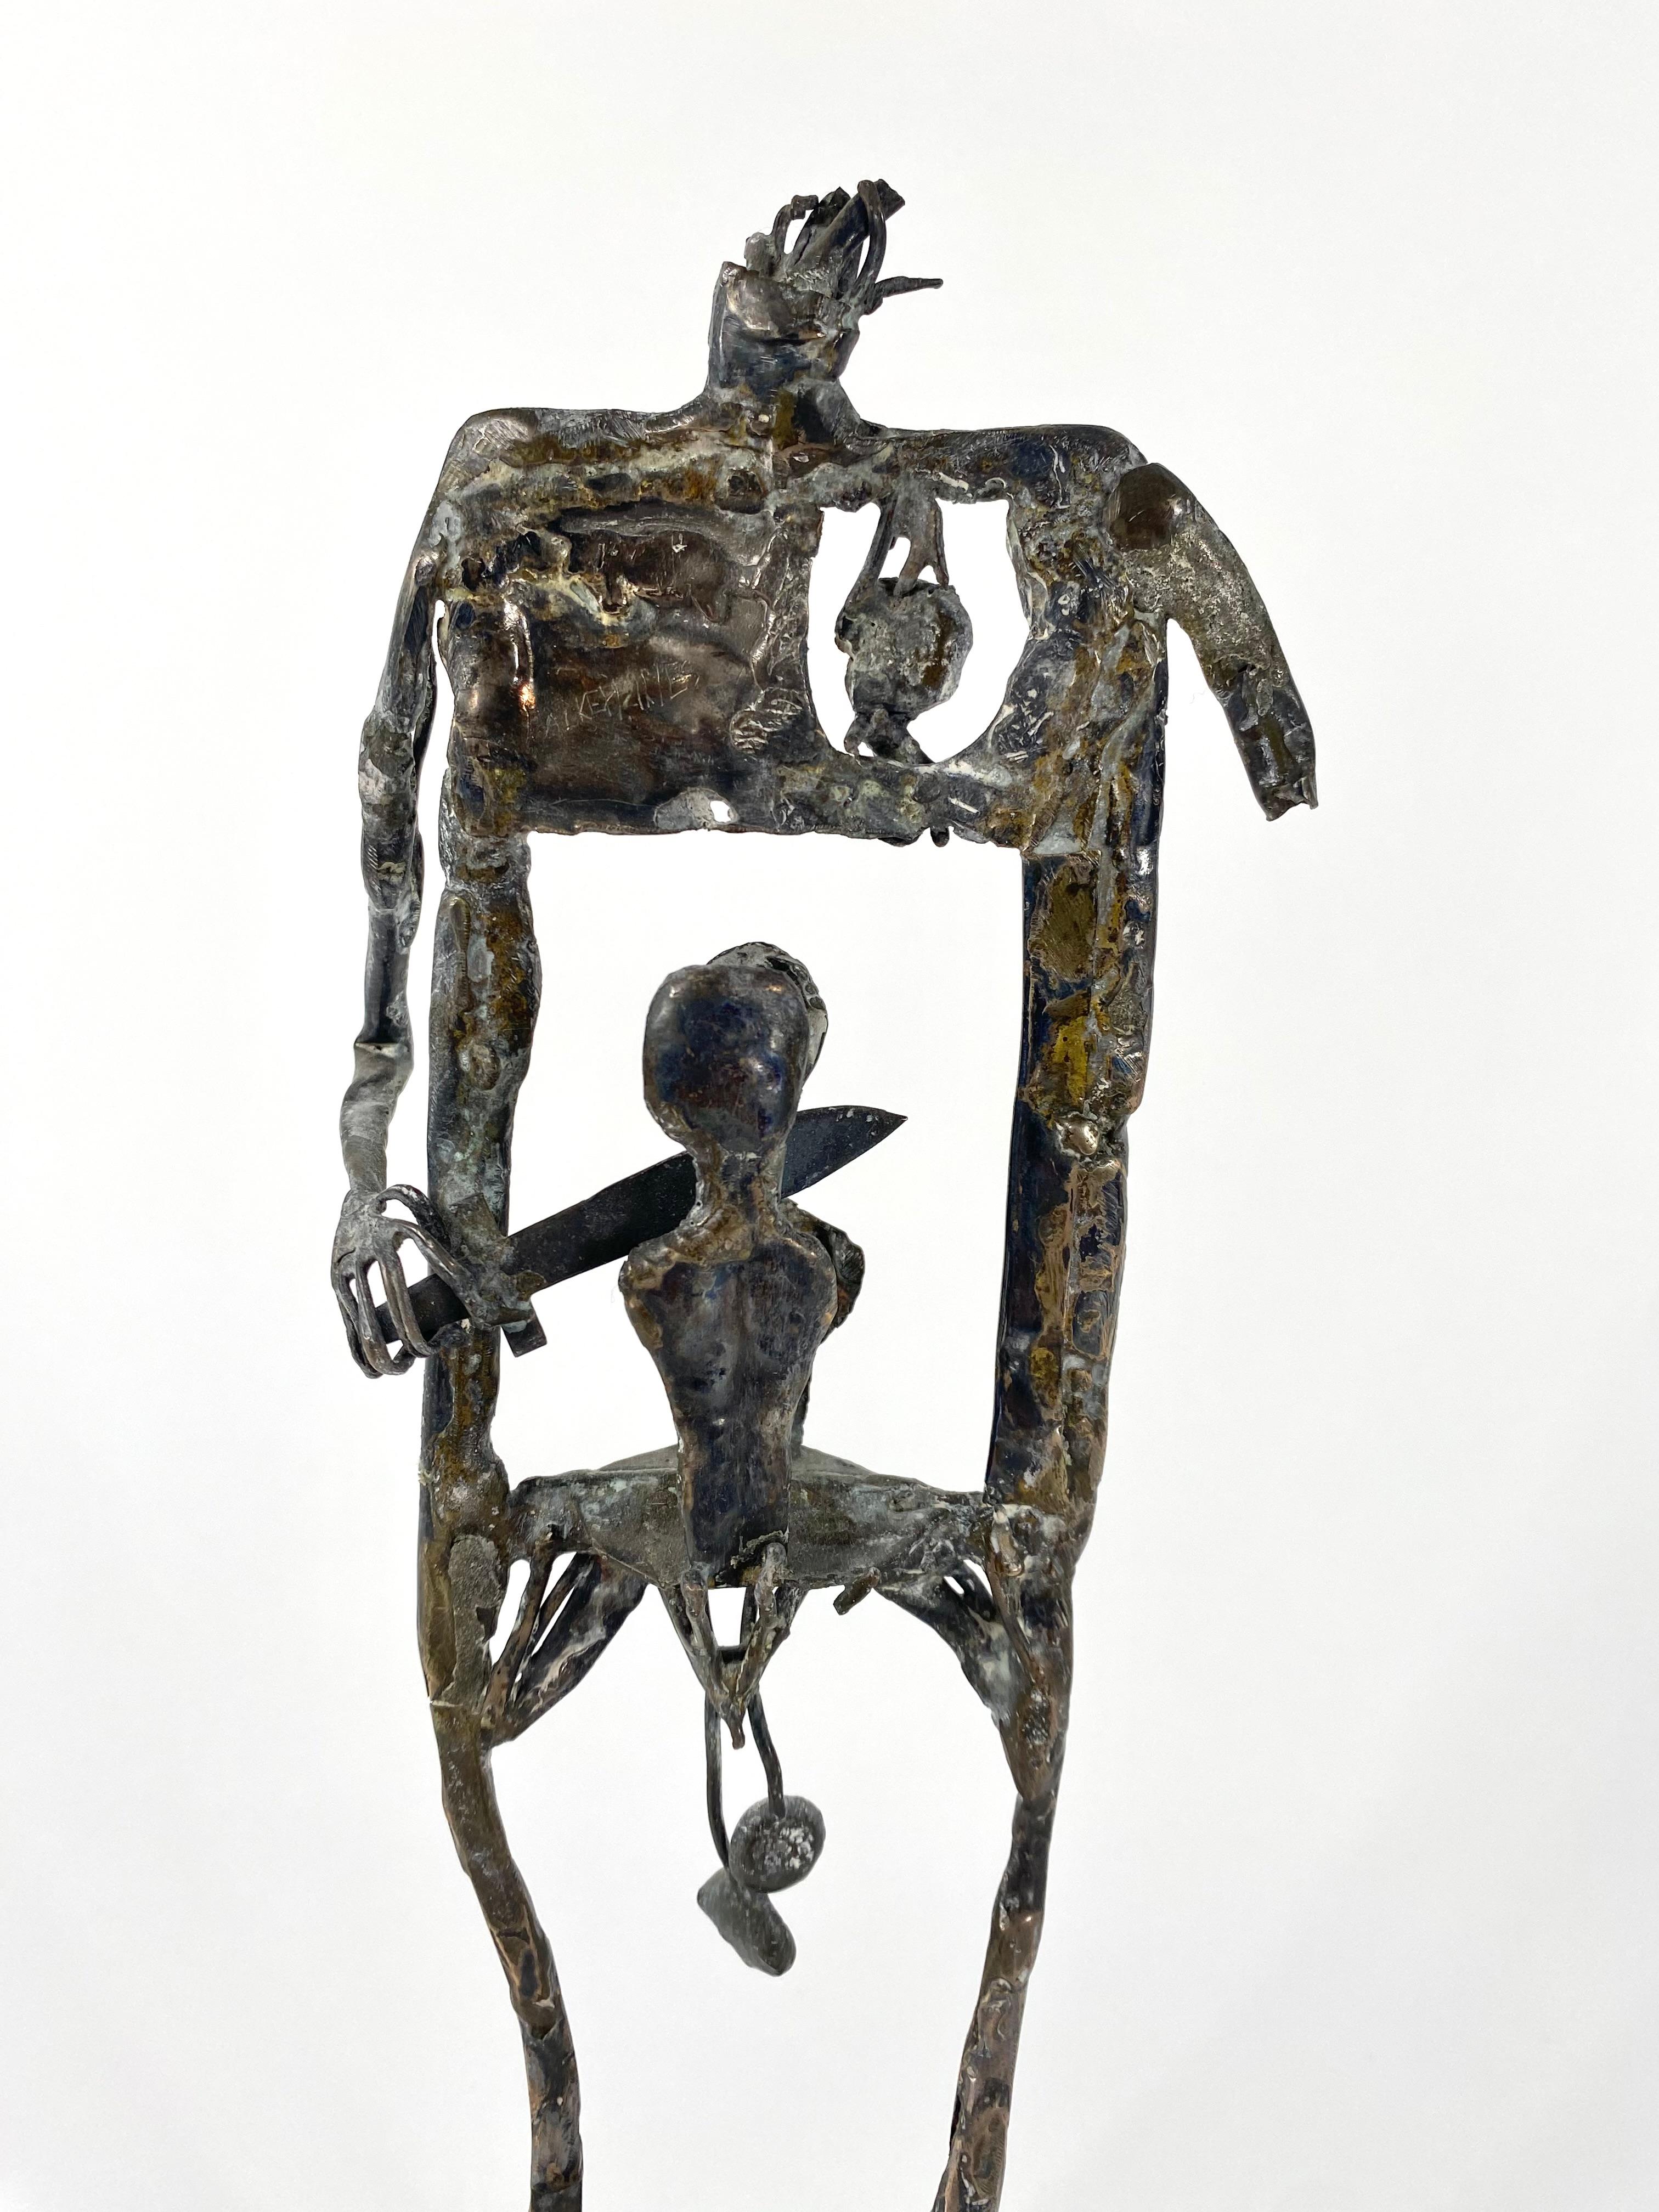 Pal Kepenyes (1923-2021) abstract figure in metal, signed by the artist, purchased by the original owners from Pal in his studio in Acapulco during the 1960s. Kepenyes was known for his Surrealist work in various mediums, sculpture, jewelry and